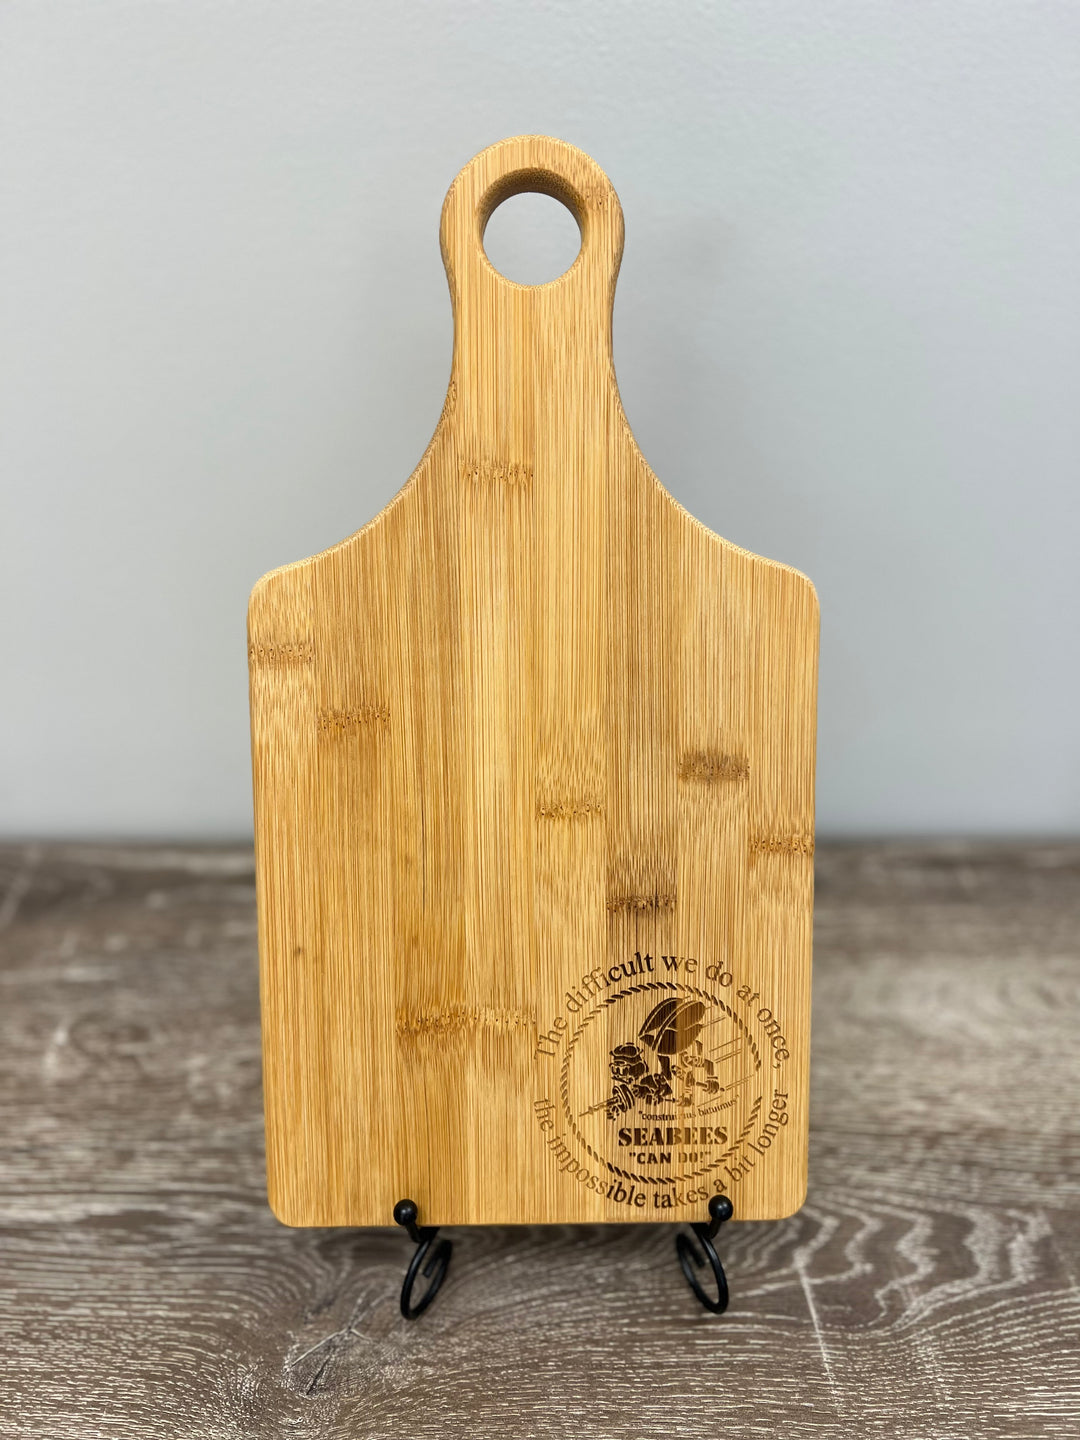 Seabee's "Can Do!" Paddle Shape Cutting Board